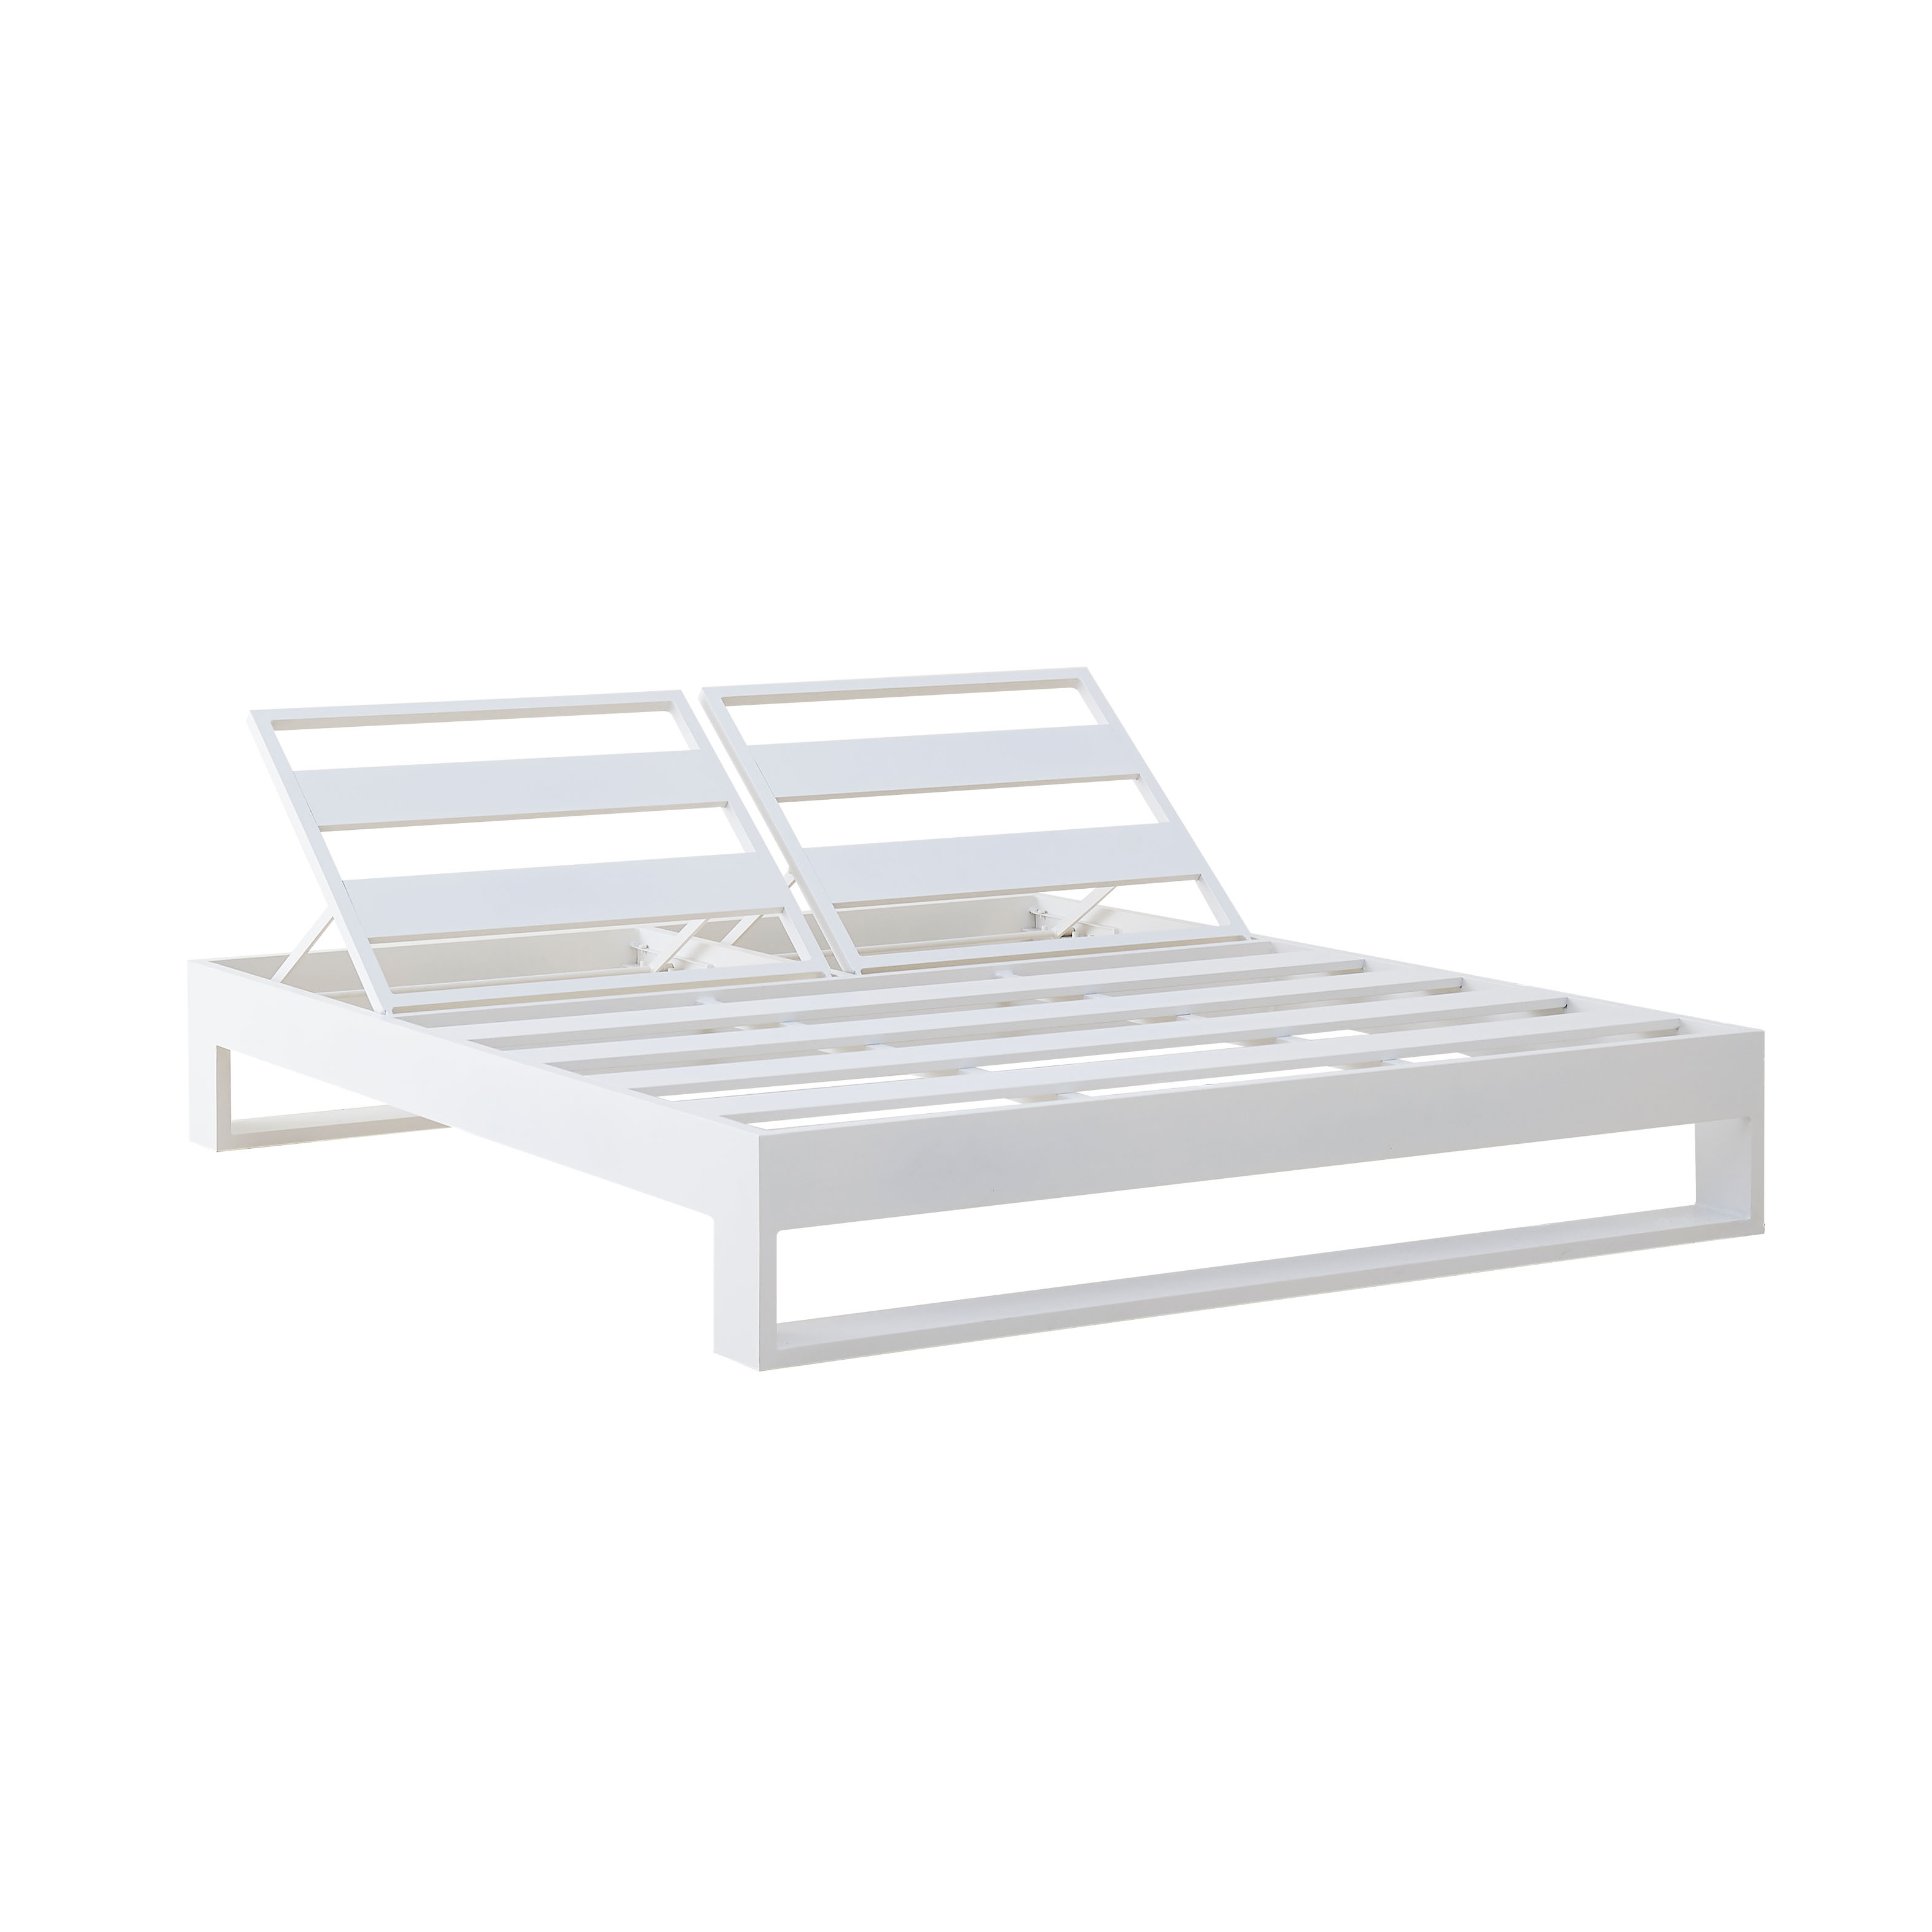 Golf kabini daybed S5